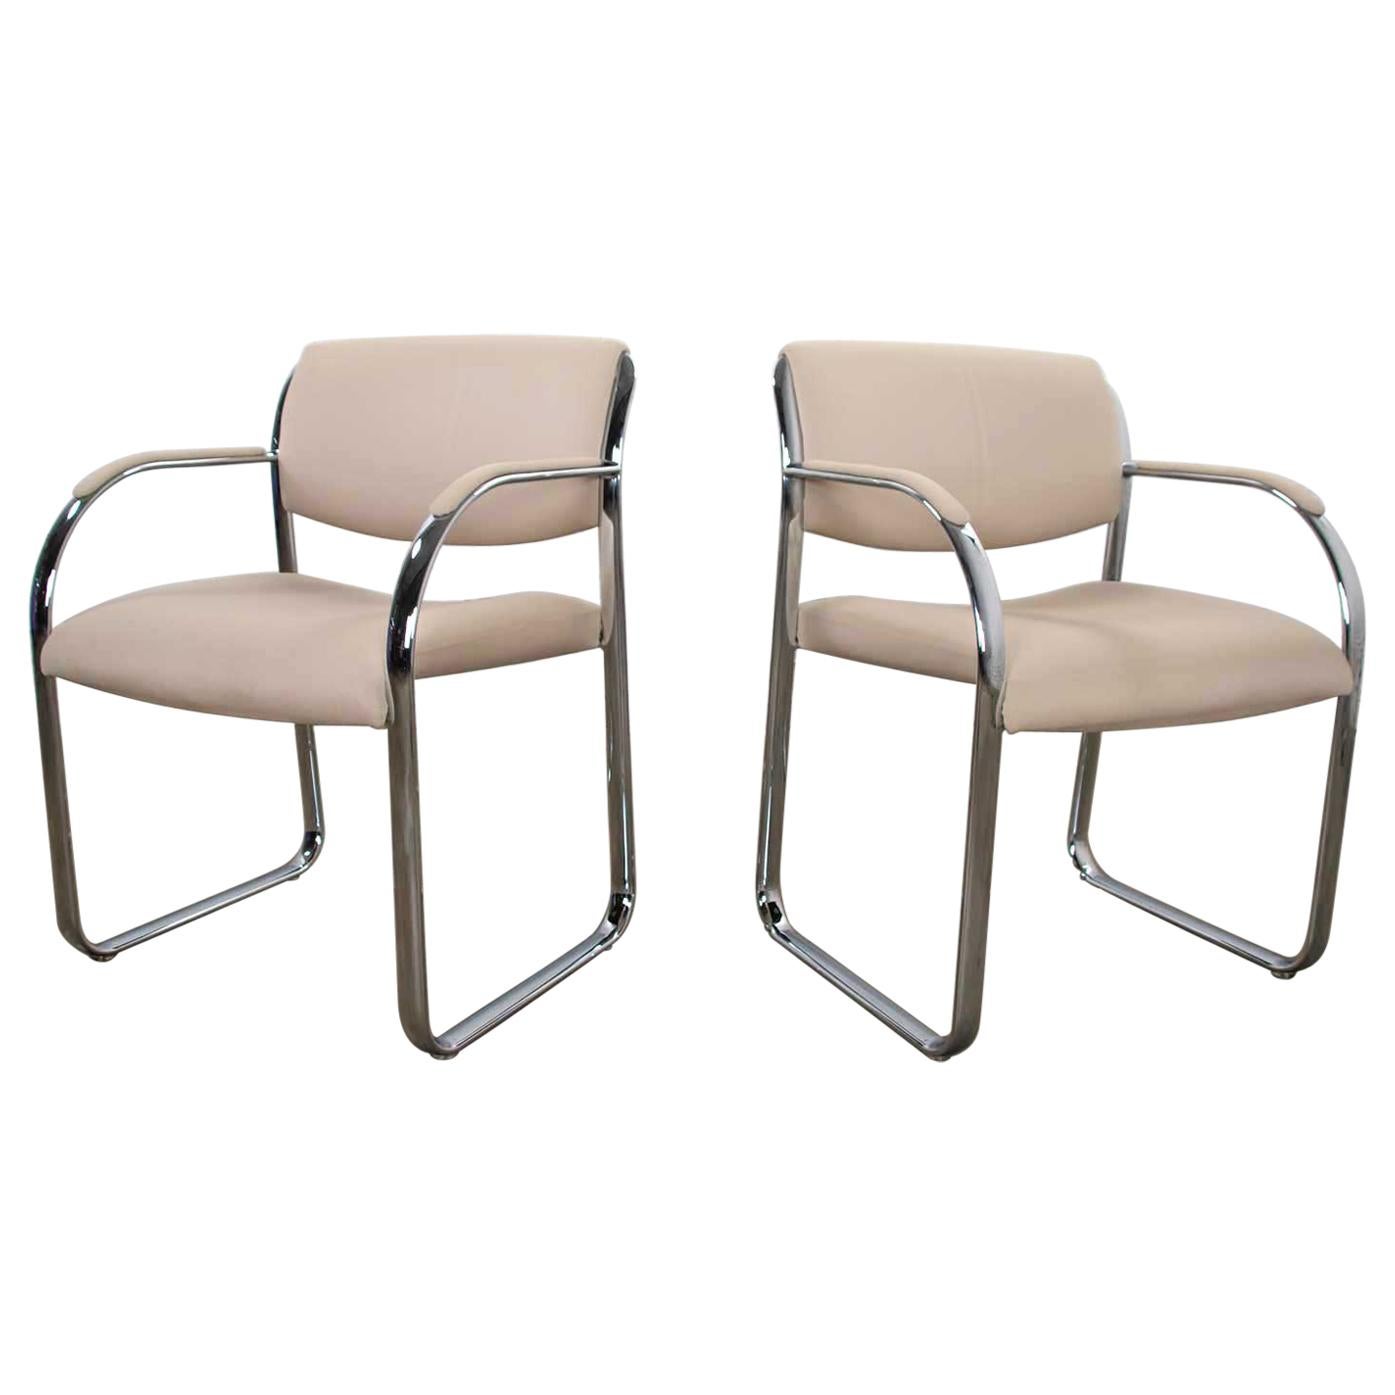 Modern Pair Off-White and Chrome Accent or Dining Armchairs by Steelcase